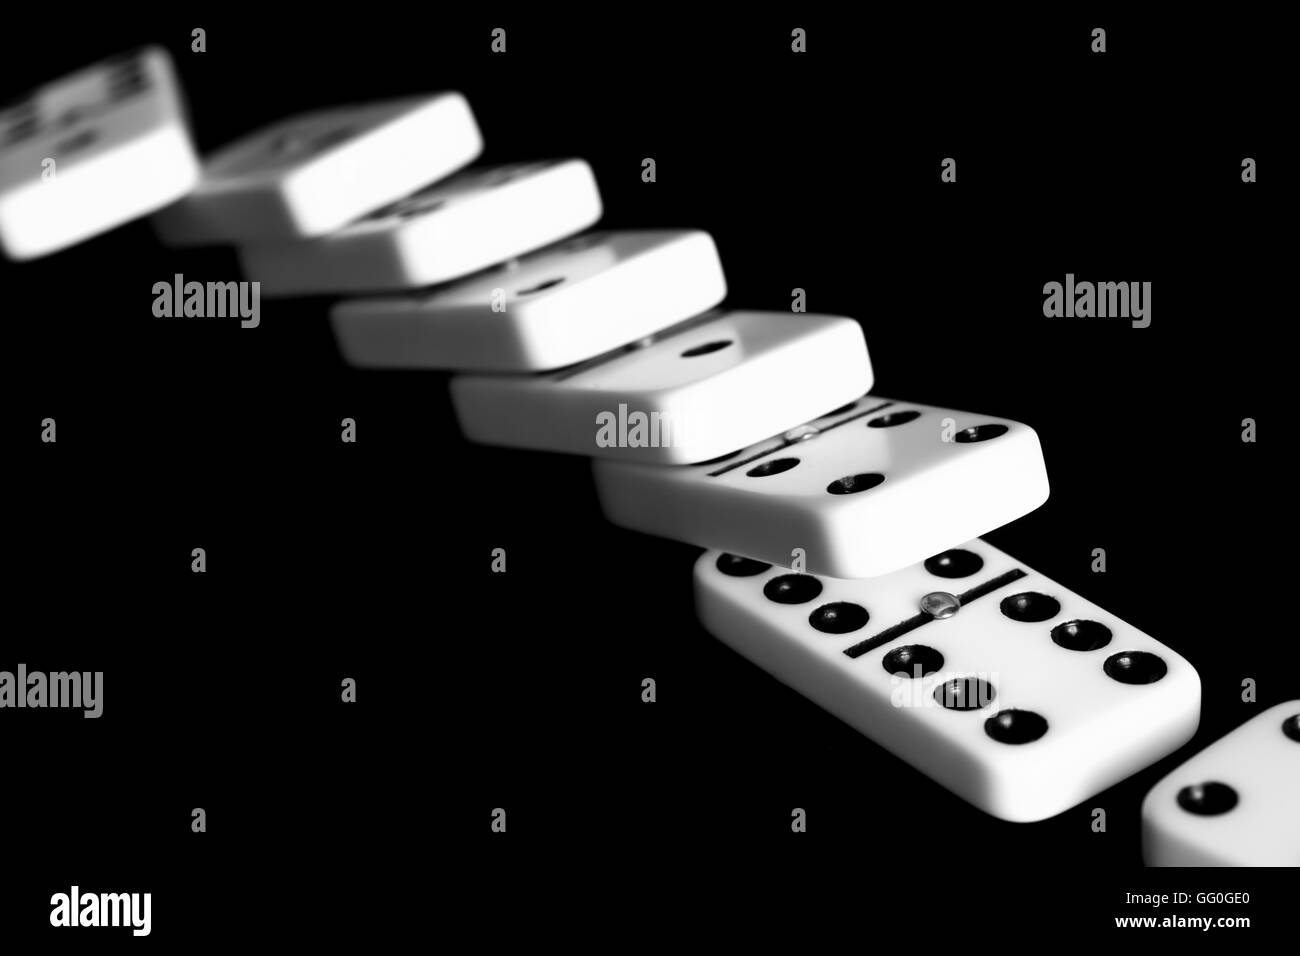 Premium Vector  Set white domino game block with shadow.